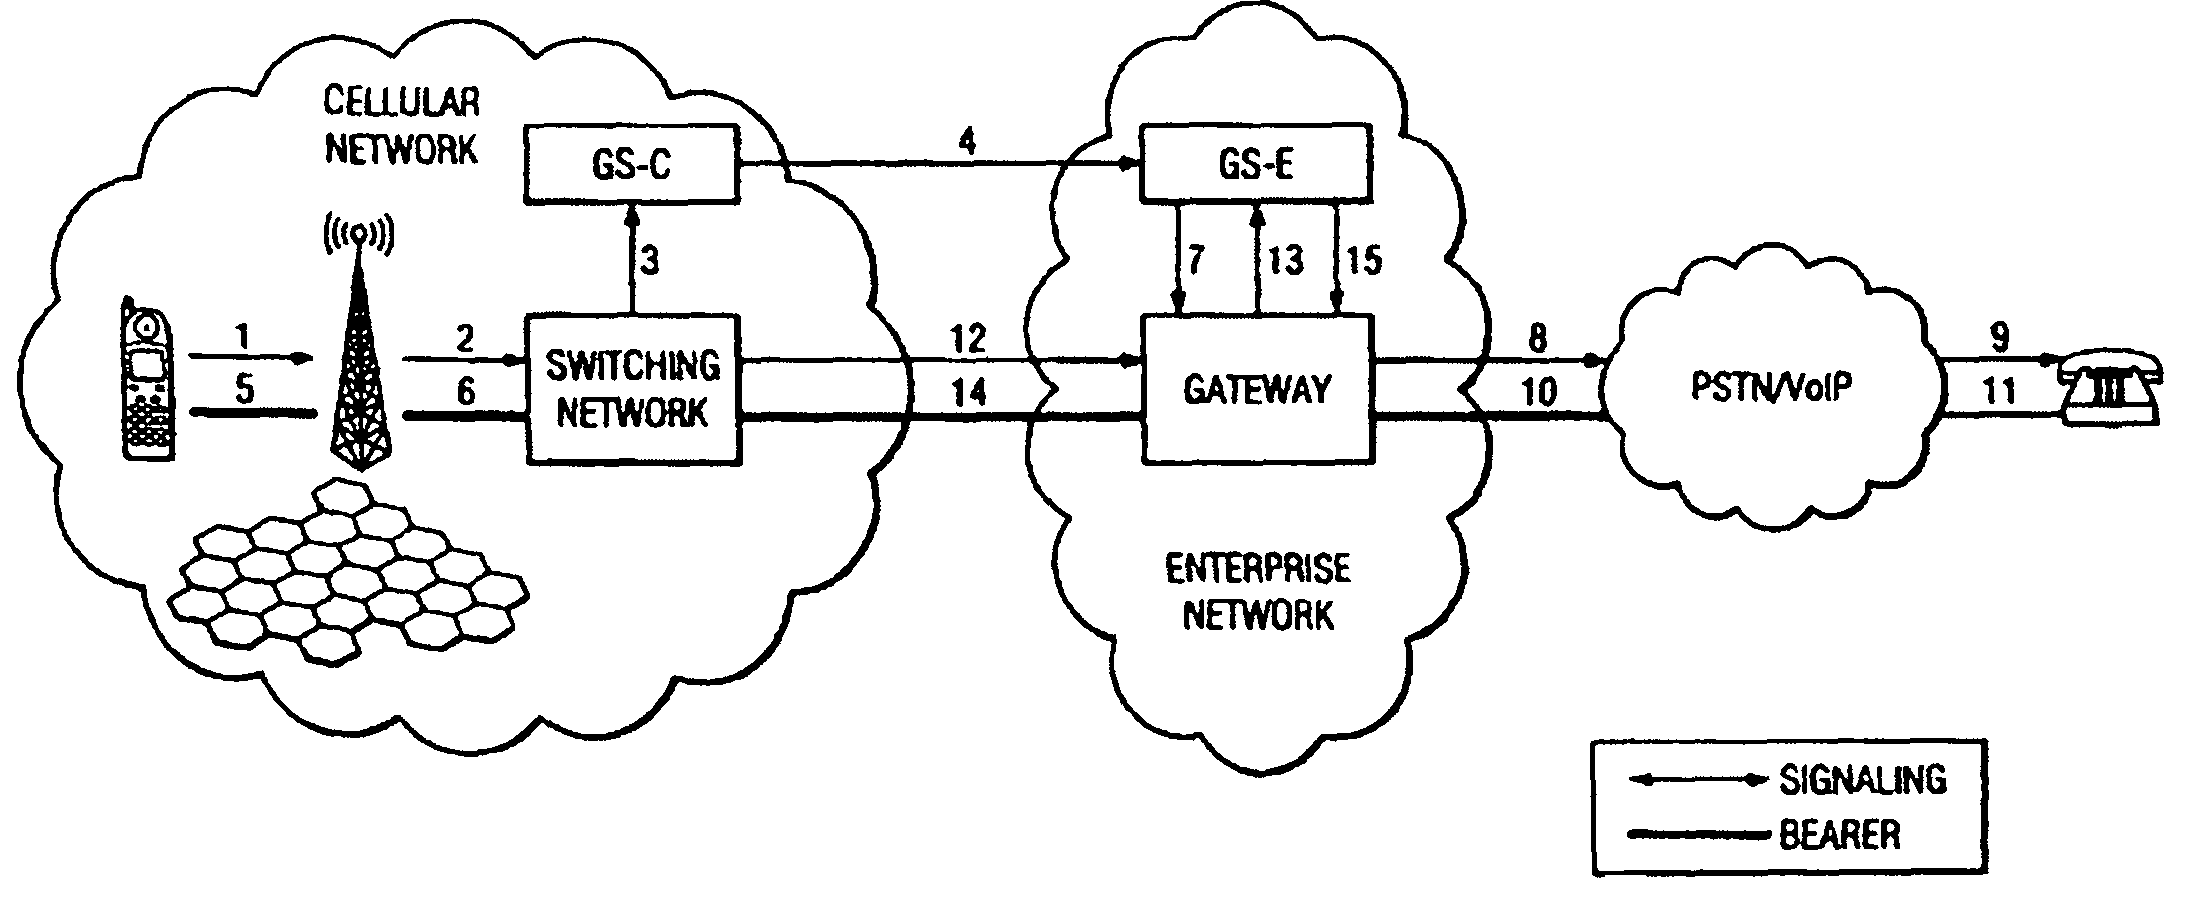 System and method for enabling VPN-less session setup for connecting mobile data devices to an enterprise data network